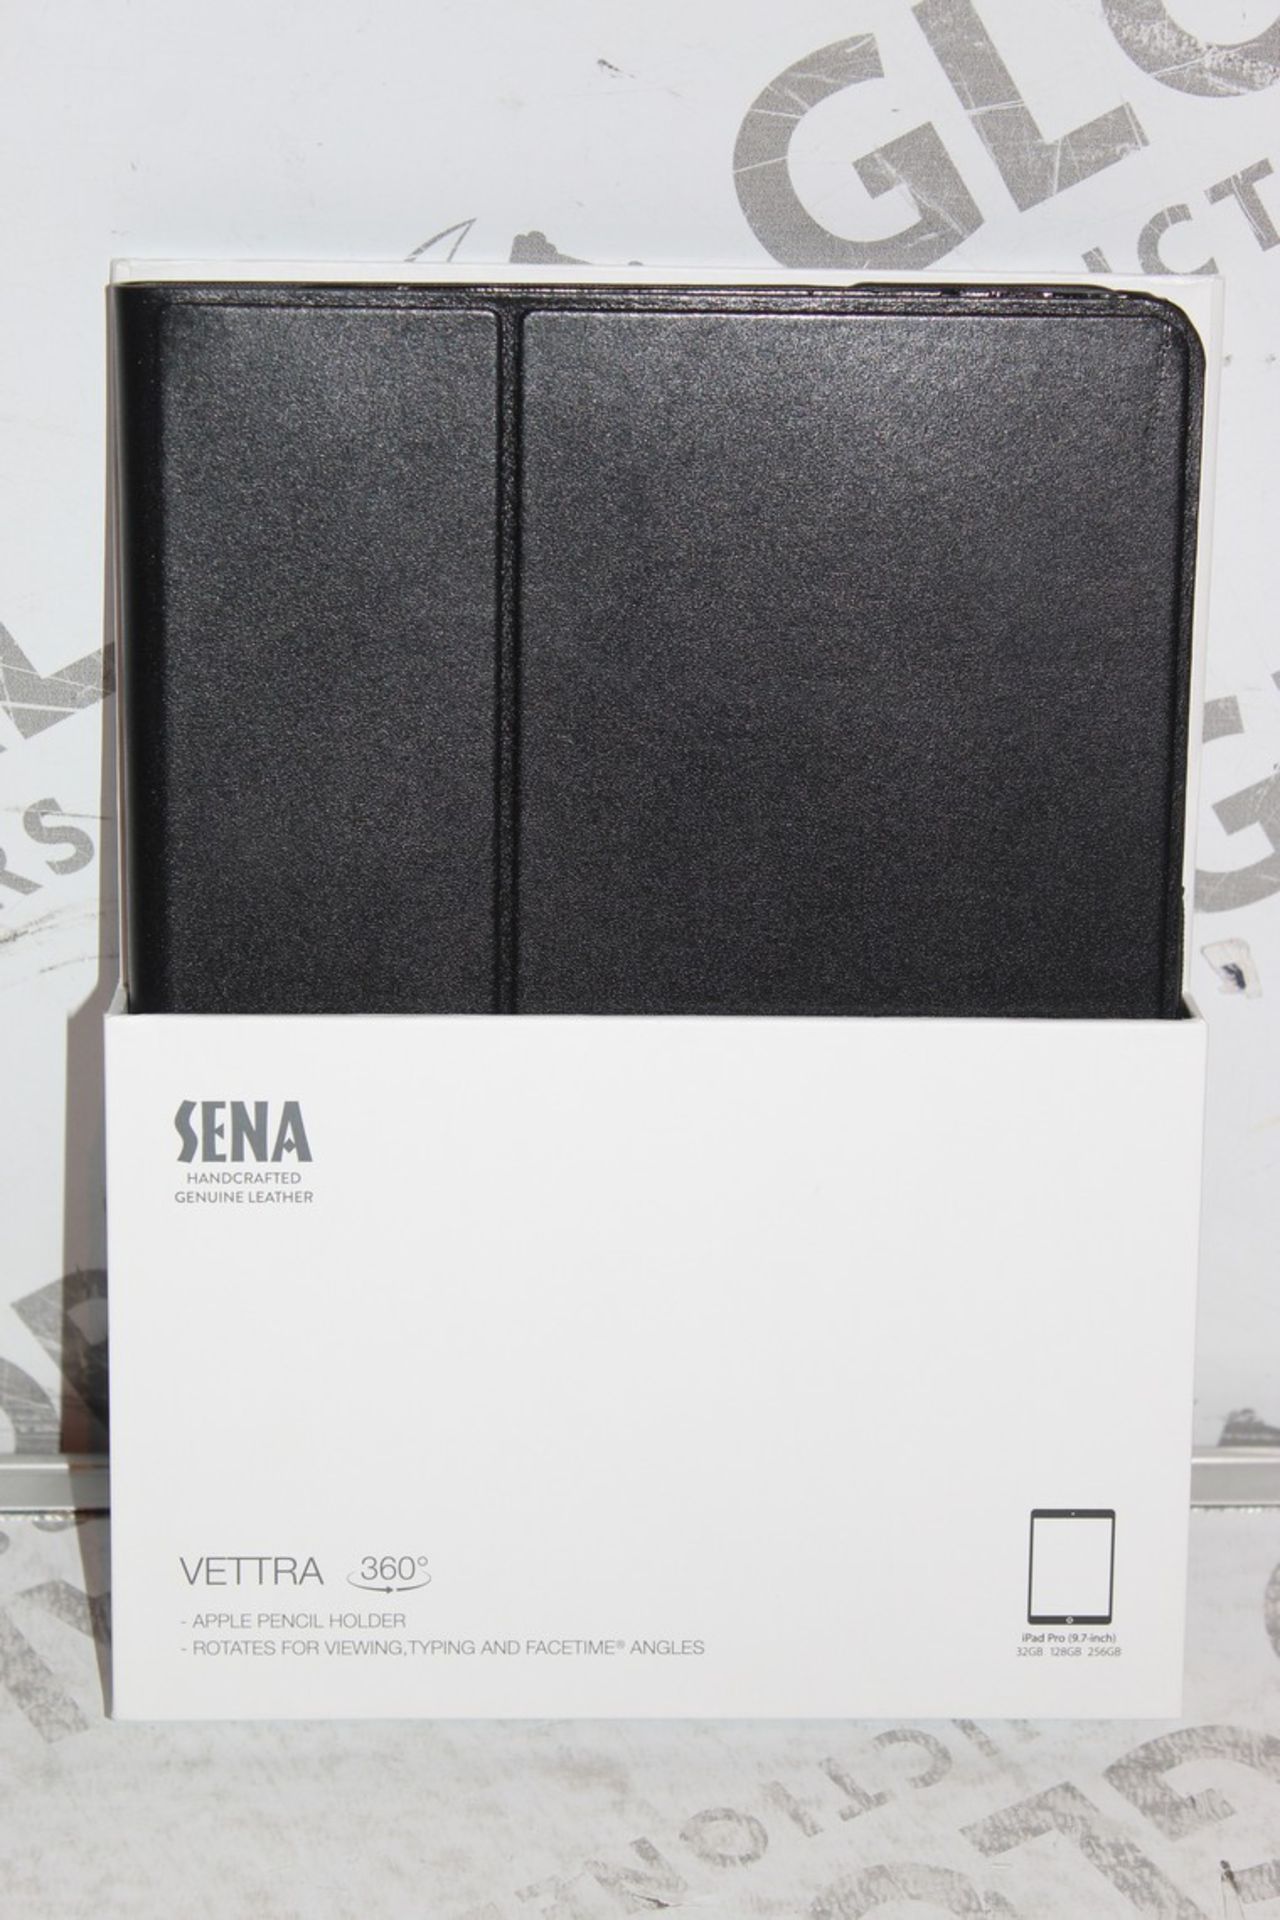 Lot to Contain 21 Brand New Sena Vettra Ipad Air 2 Black Leather Ipad Cases Combined RRP £840